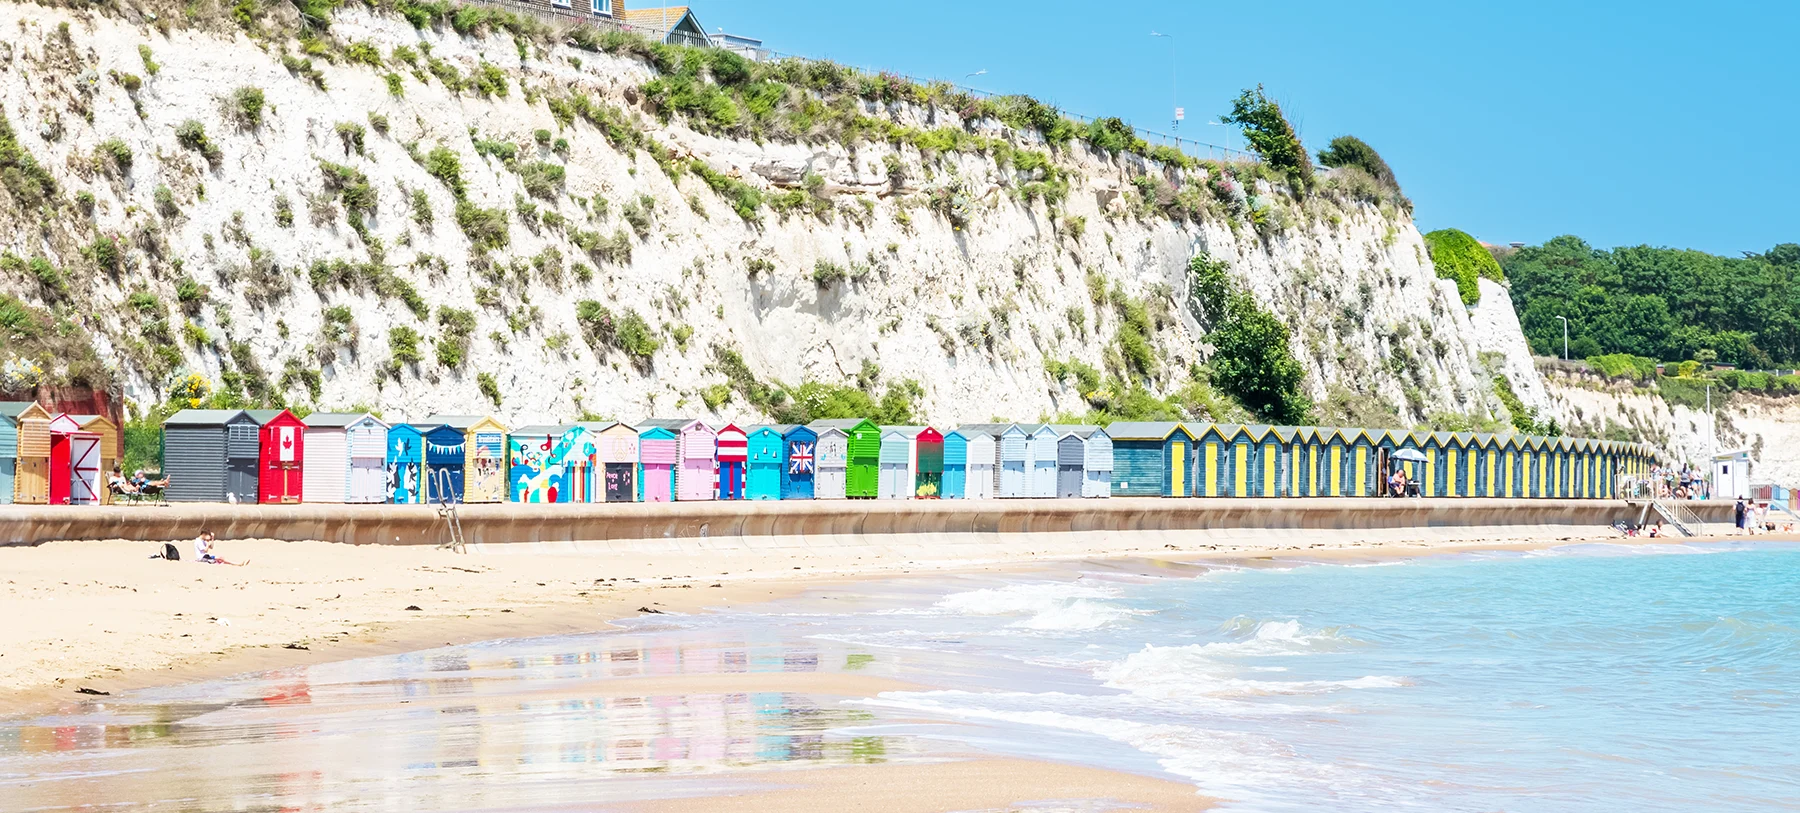 A row of colourful beach huts in Broadstairs, Kent, with the sea in the foreground and cliffs behind.